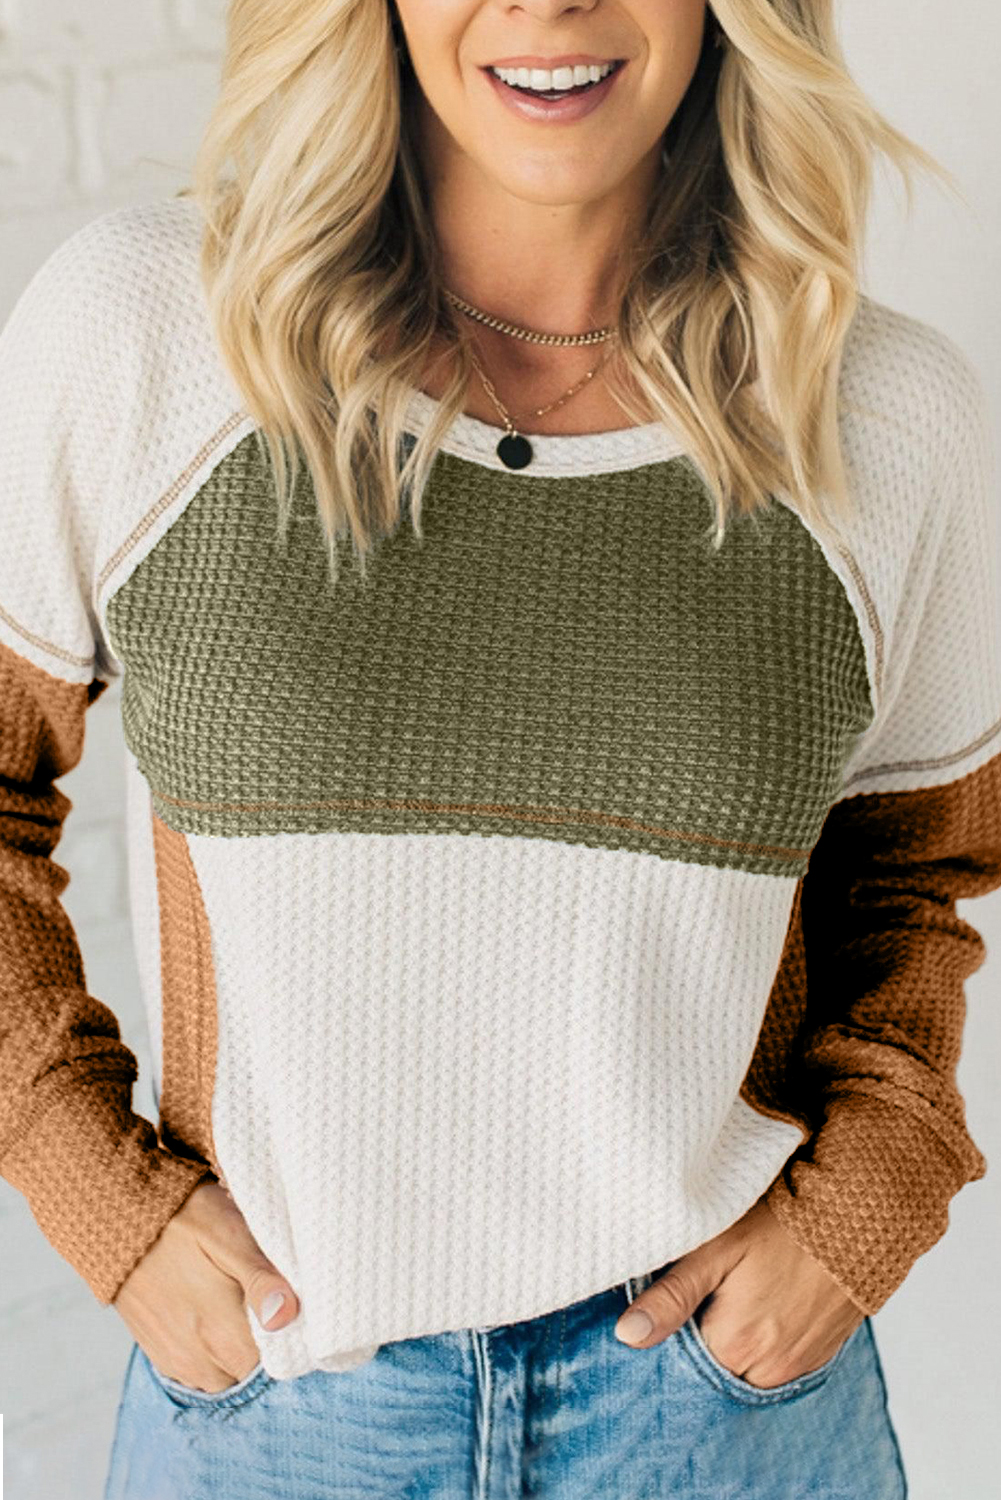 Shewin Wholesale WESTERN Clothing  Green Waffle Knit Colorblock Patch Long Sleeve Top